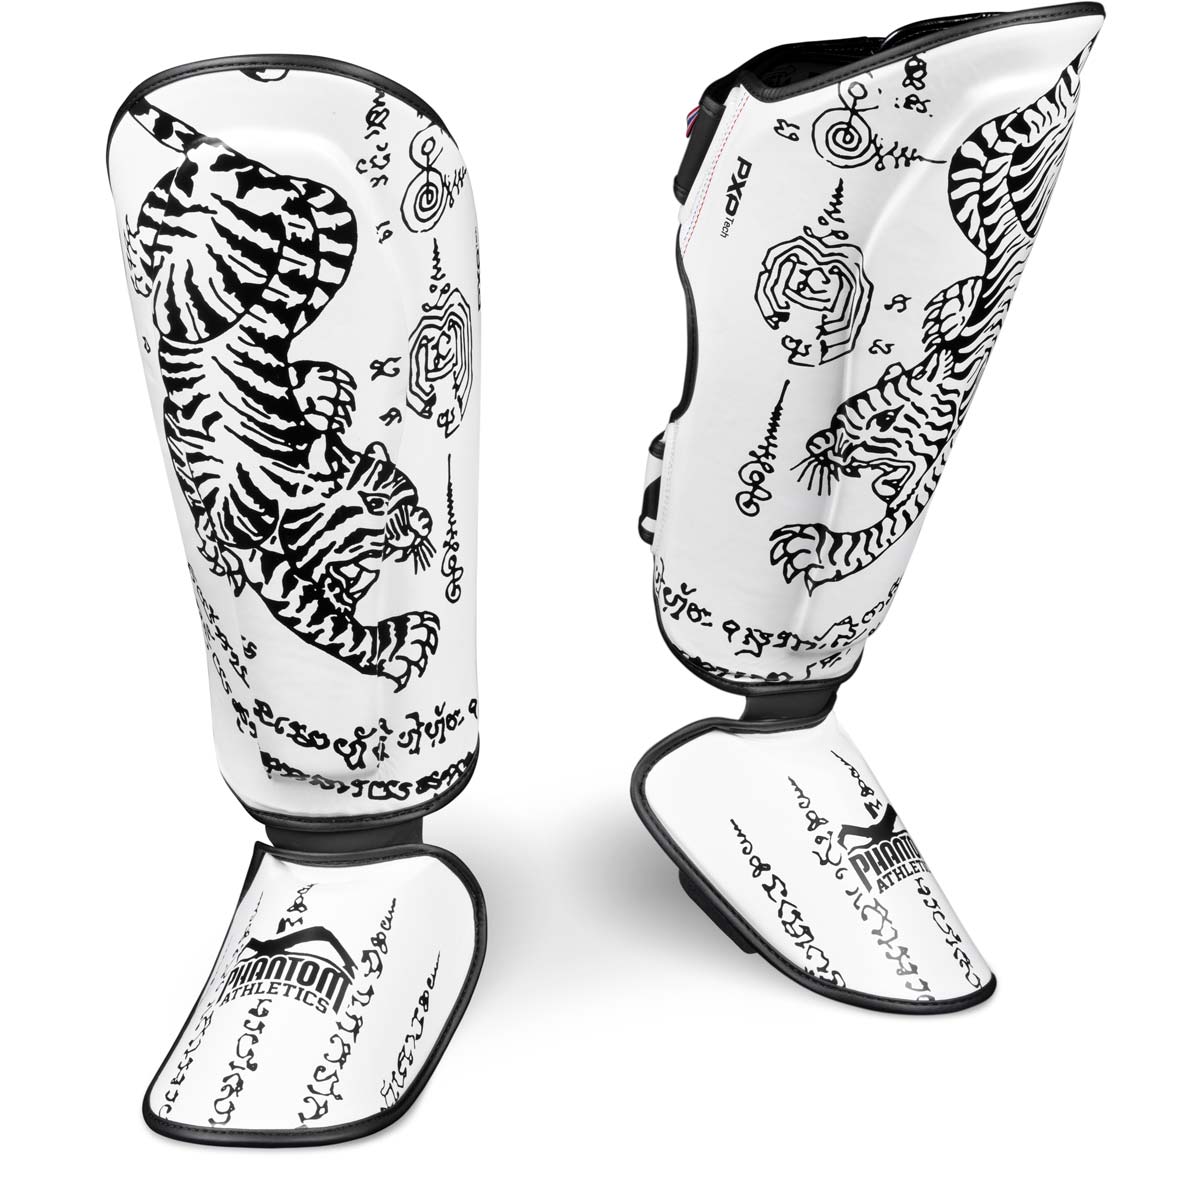 Phantom Muay Thai shin guard for Thai boxing and MMA sparring, competition and training. In the traditional Sak Yant design and the color white.